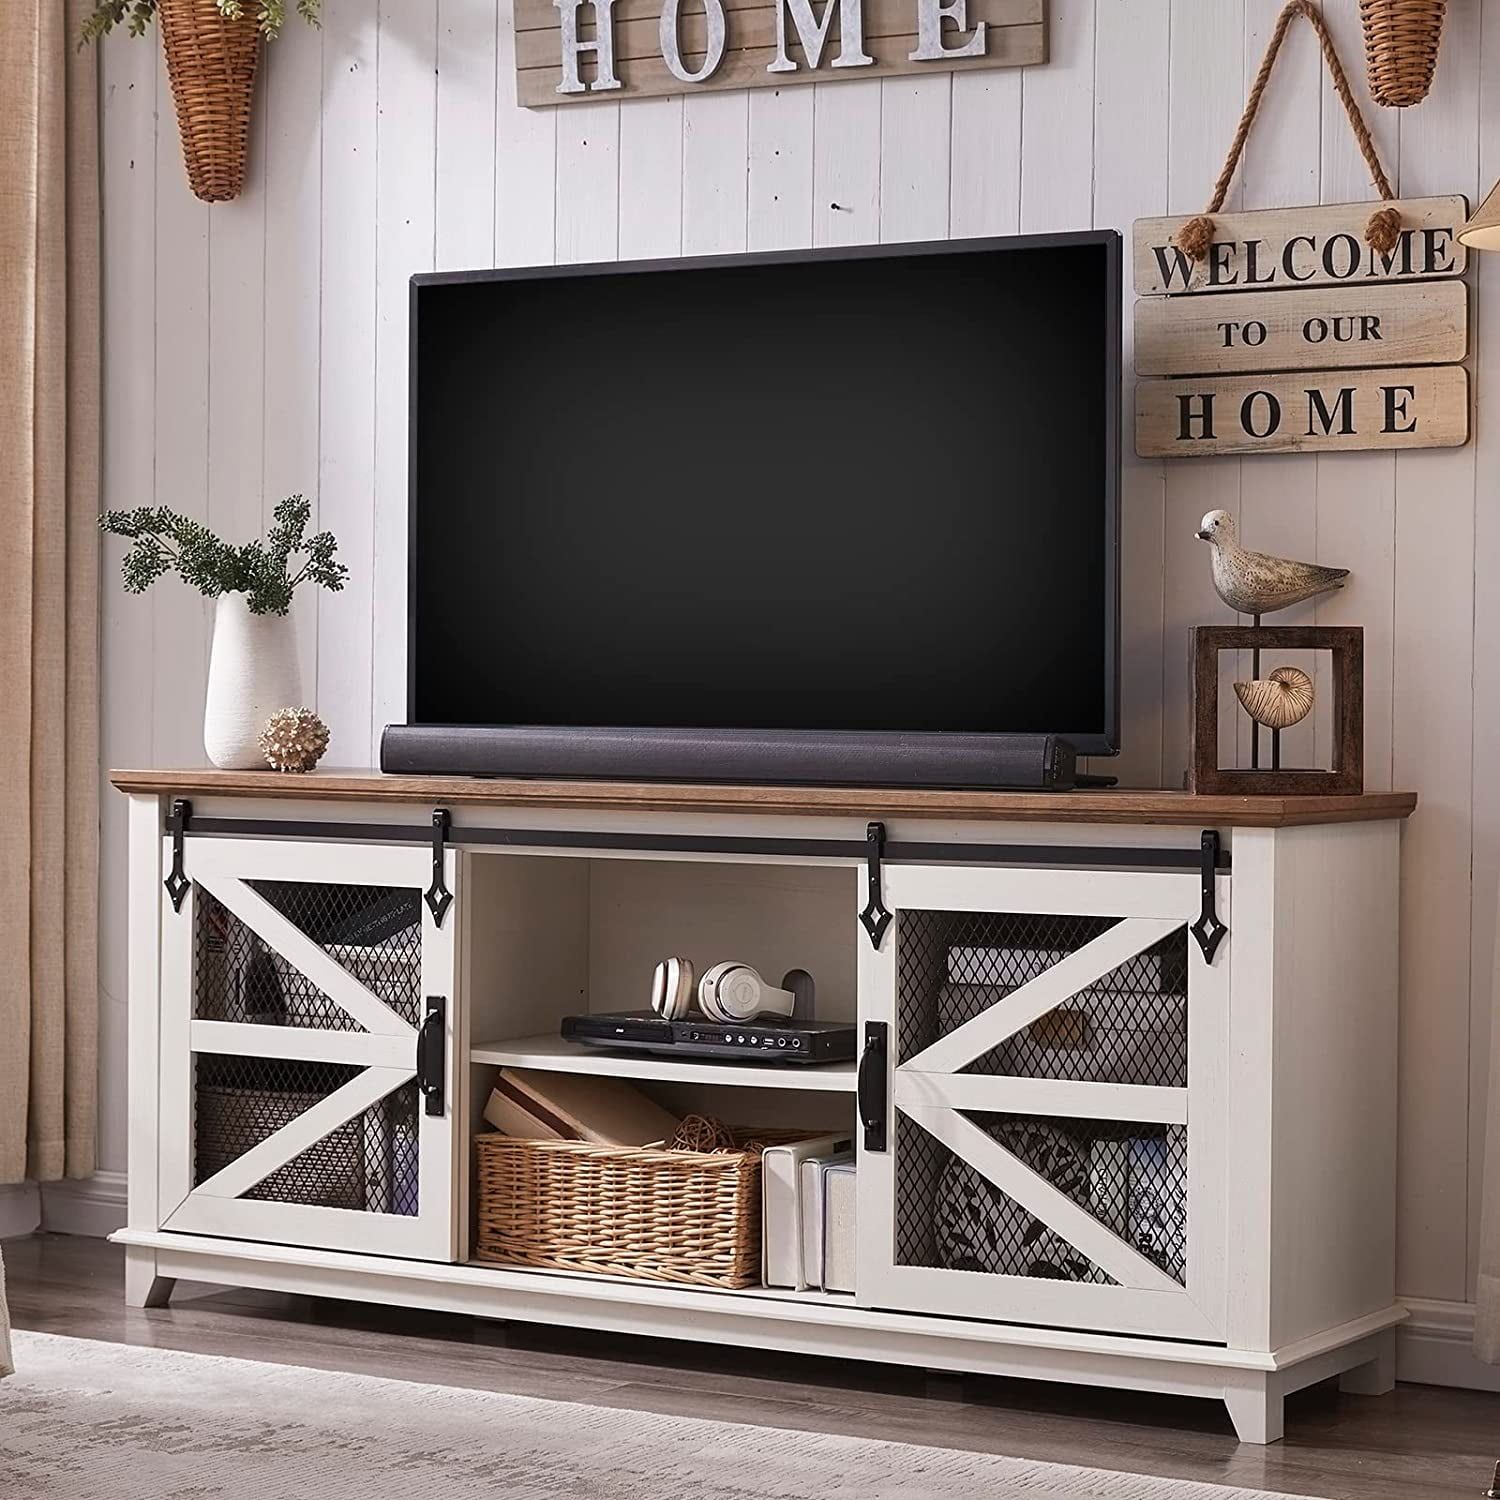 Okd Farmhouse Tv Stand For 75+ Inch Tv, Entertainment Center With  Adjustable Shelves For Living Room, Antique White – Walmart In Farmhouse Stands With Shelves (View 9 of 15)